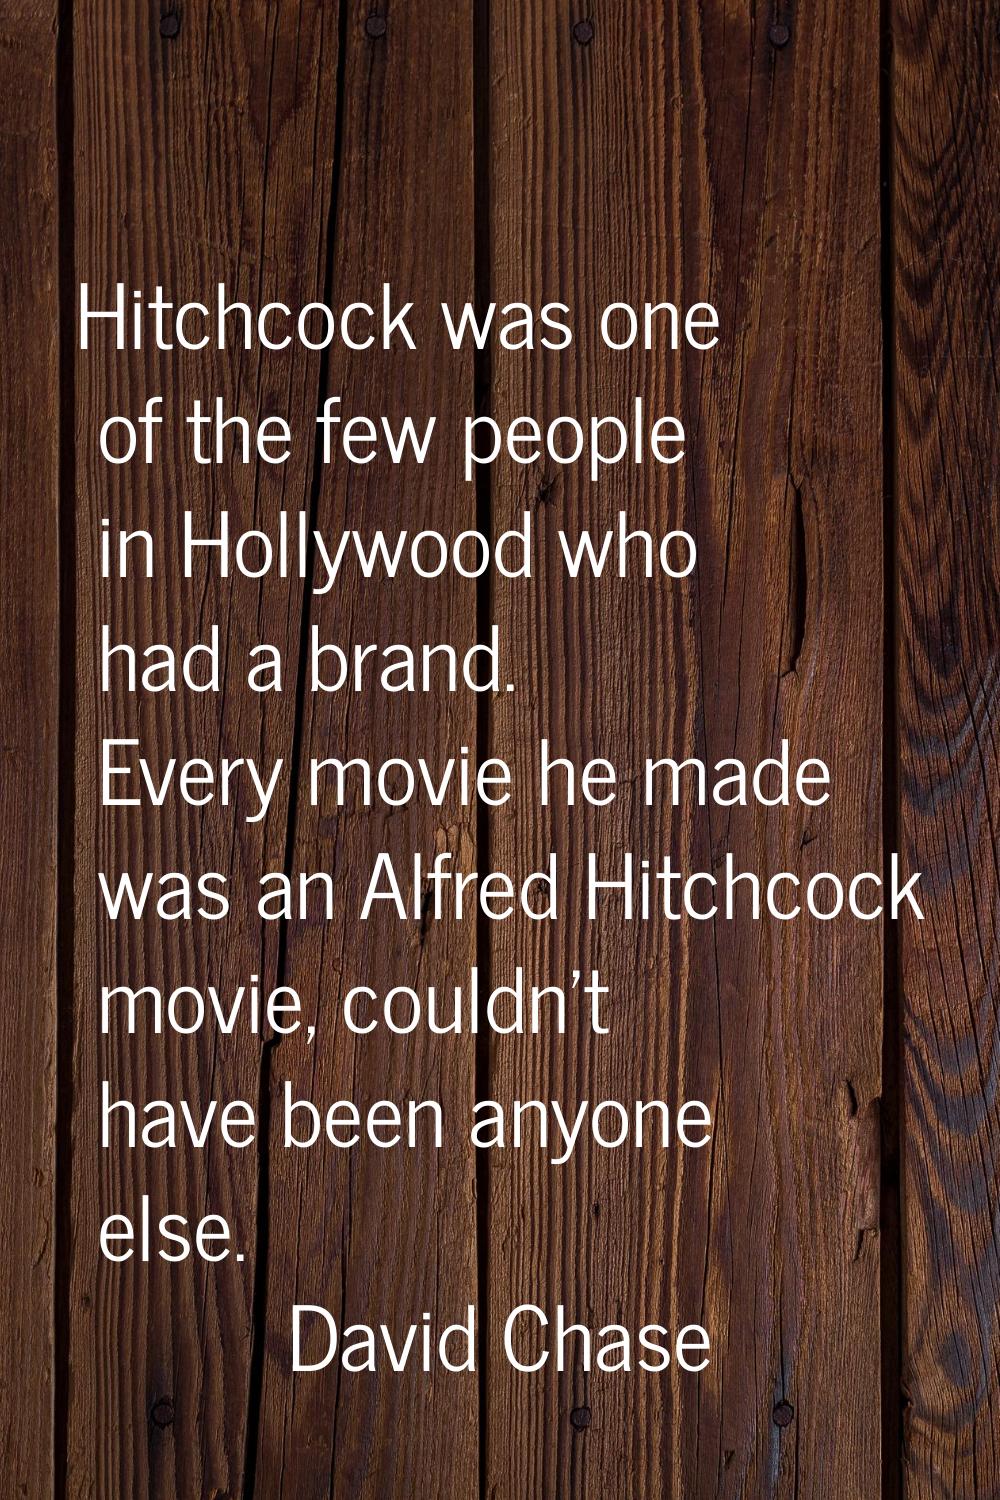 Hitchcock was one of the few people in Hollywood who had a brand. Every movie he made was an Alfred